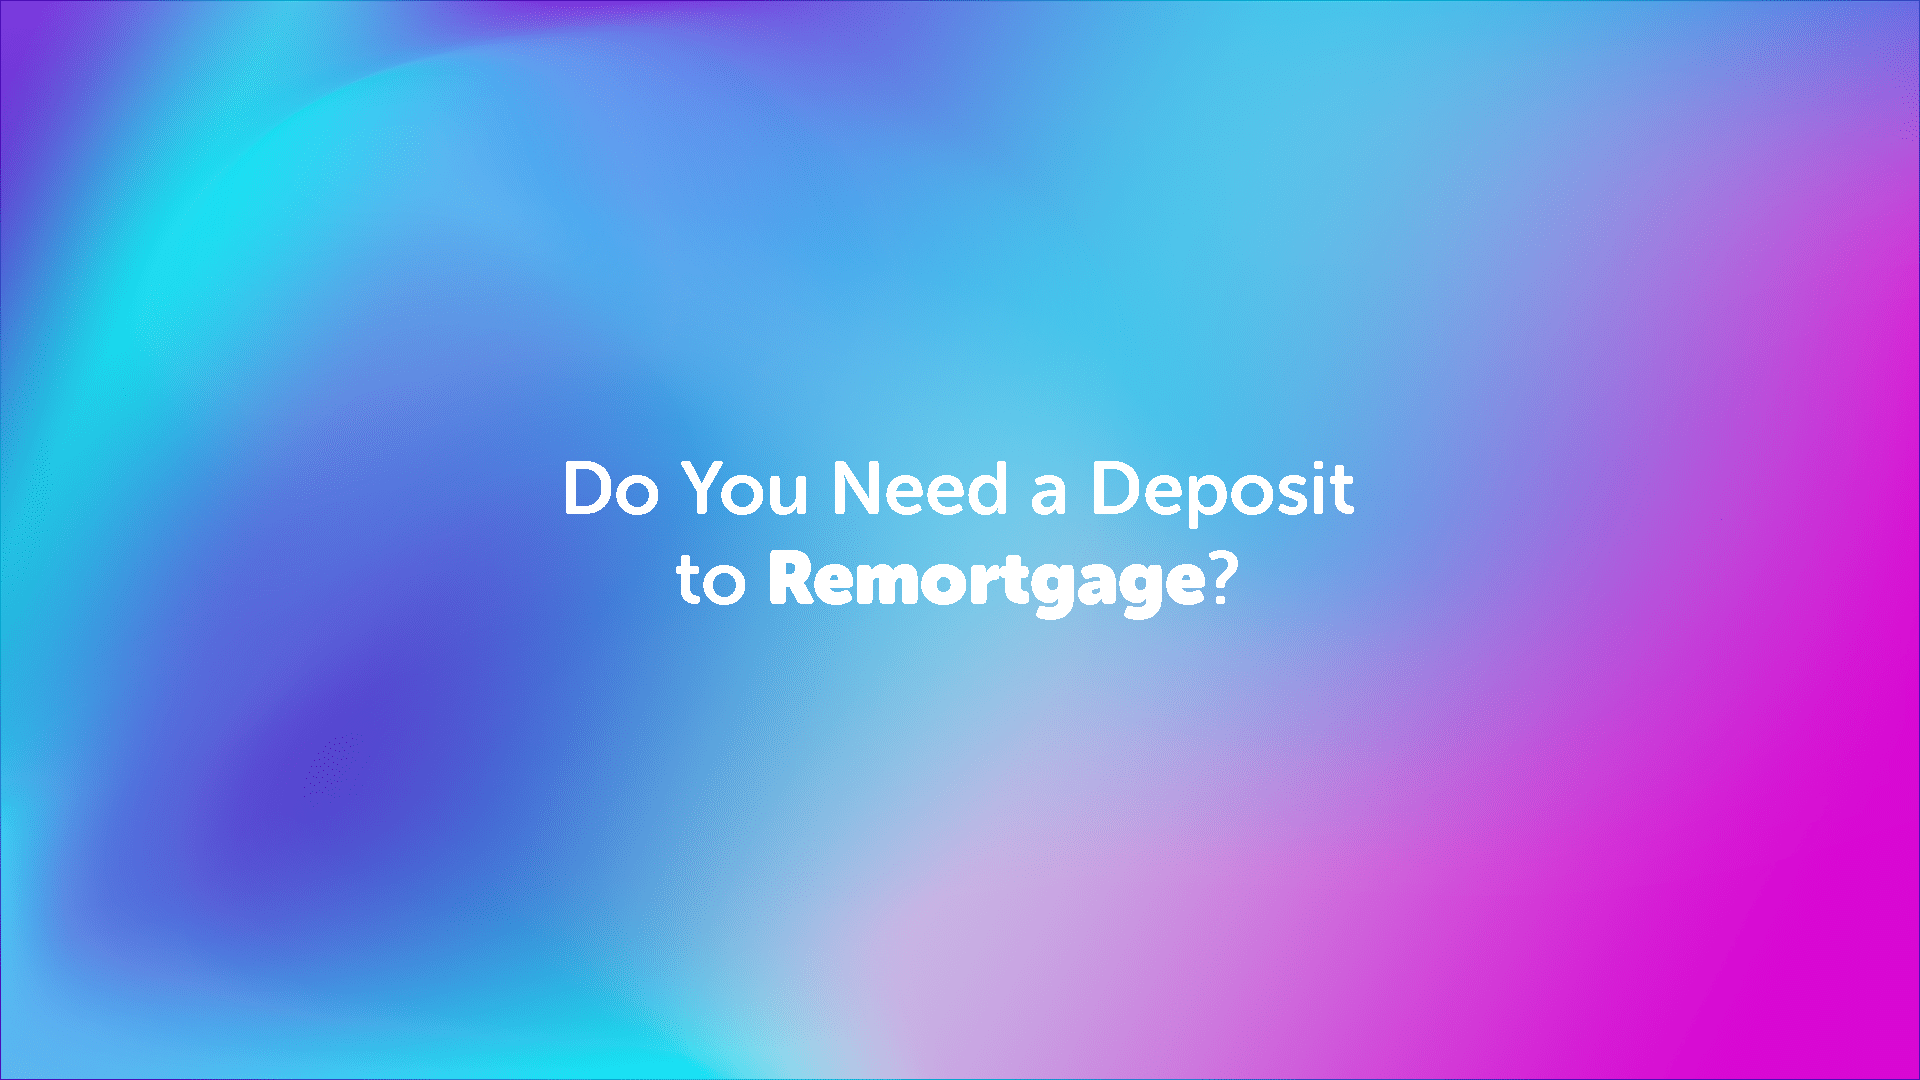 Do You Need a Deposit to Remortgage in Leeds?